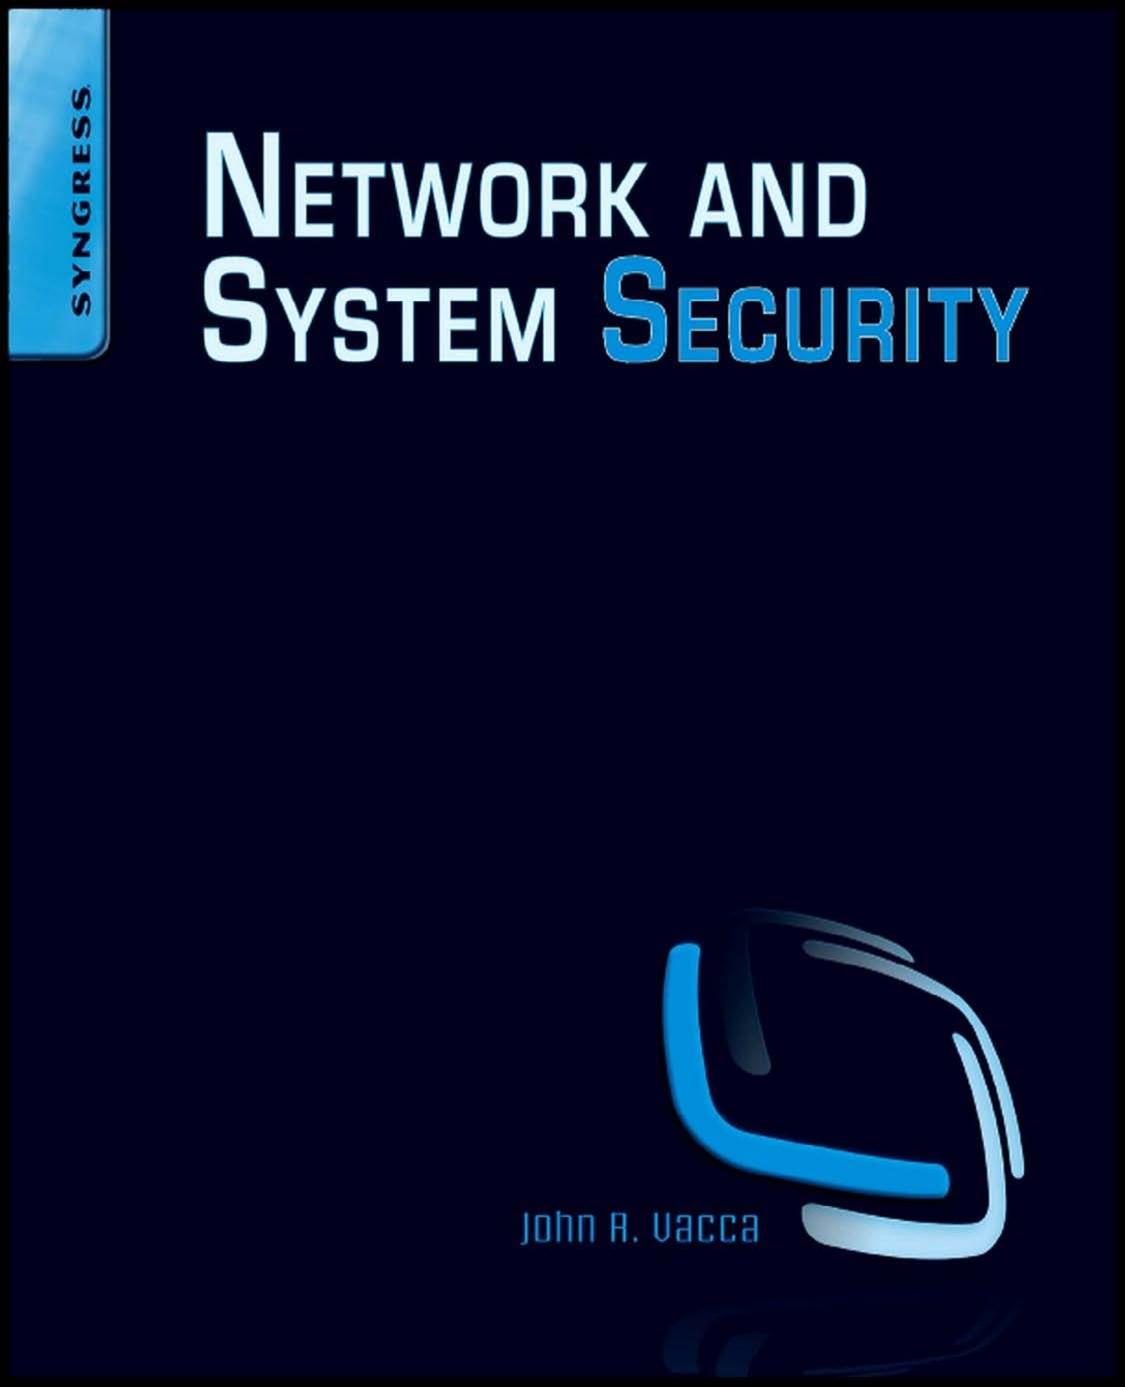 Network and System Security by John R. Vacca